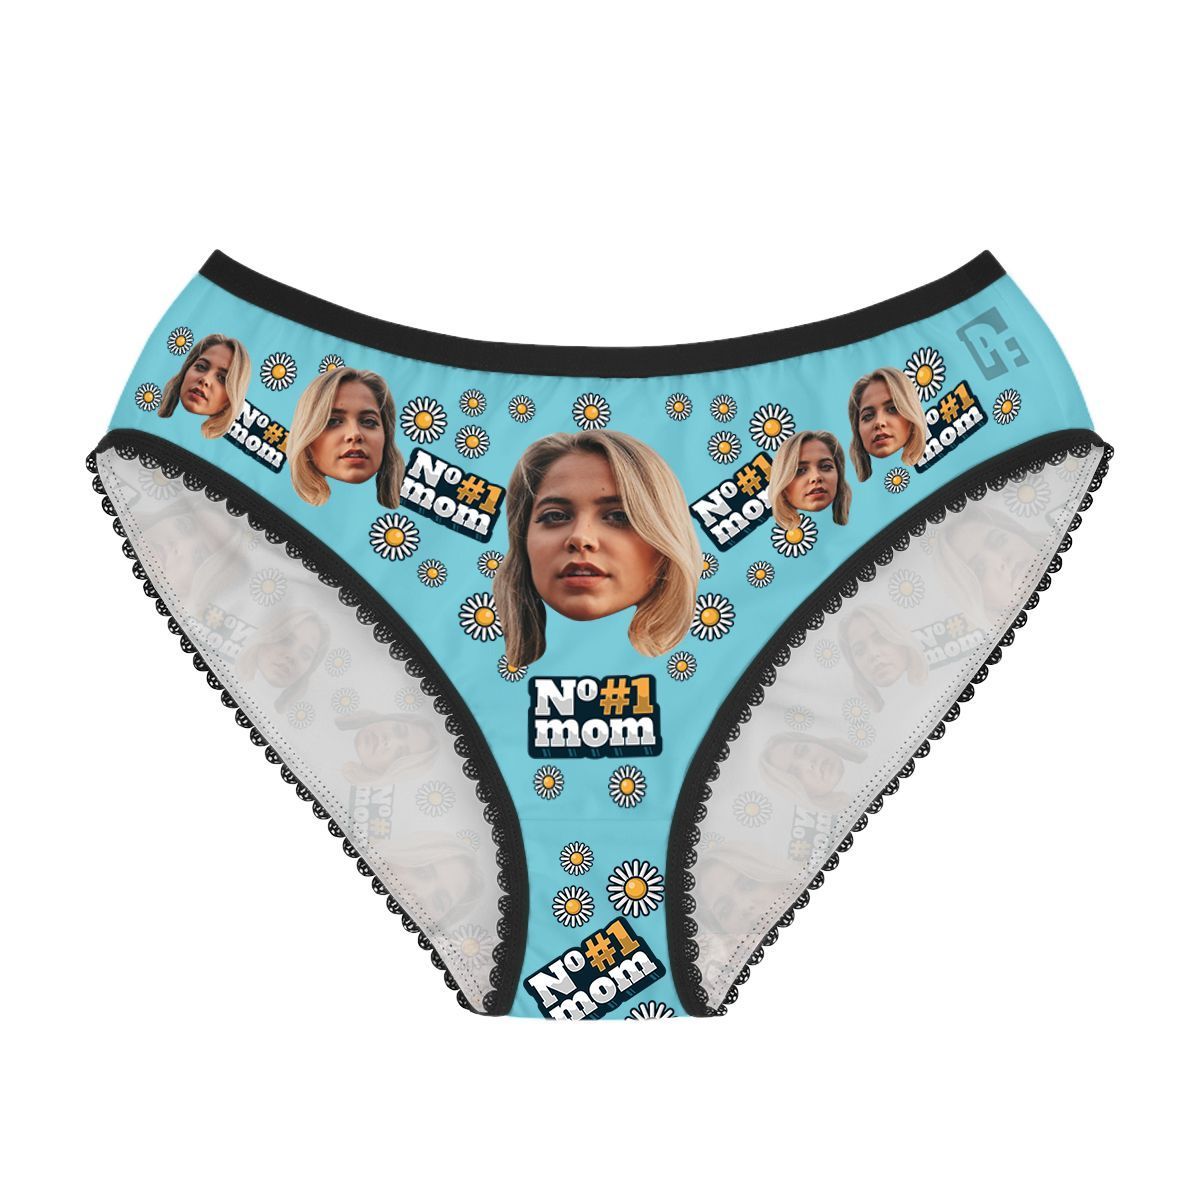 Blue #1 Mom women's underwear briefs personalized with photo printed on them